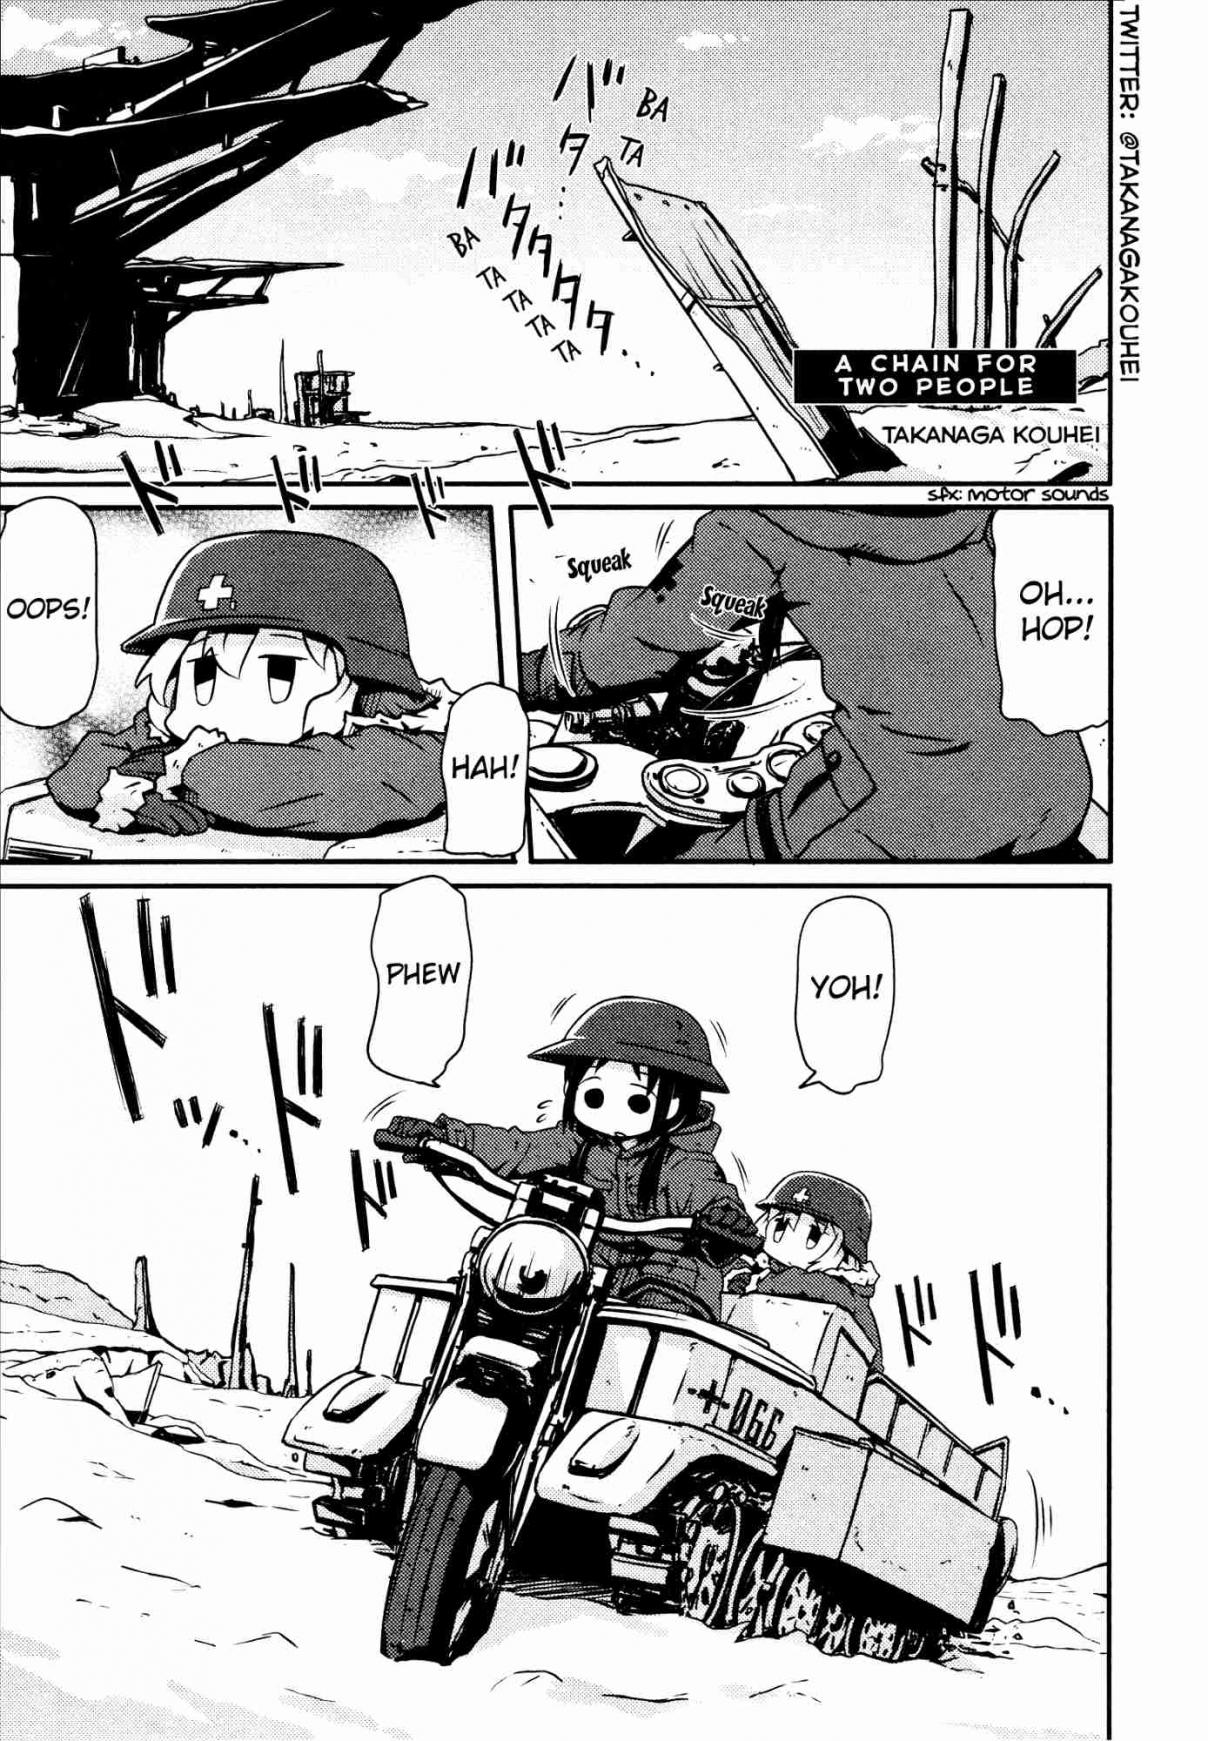 Girls' Last Tour Official Anthology Comic Ch. 15 A Chain for Two People Takanaga Kouhei